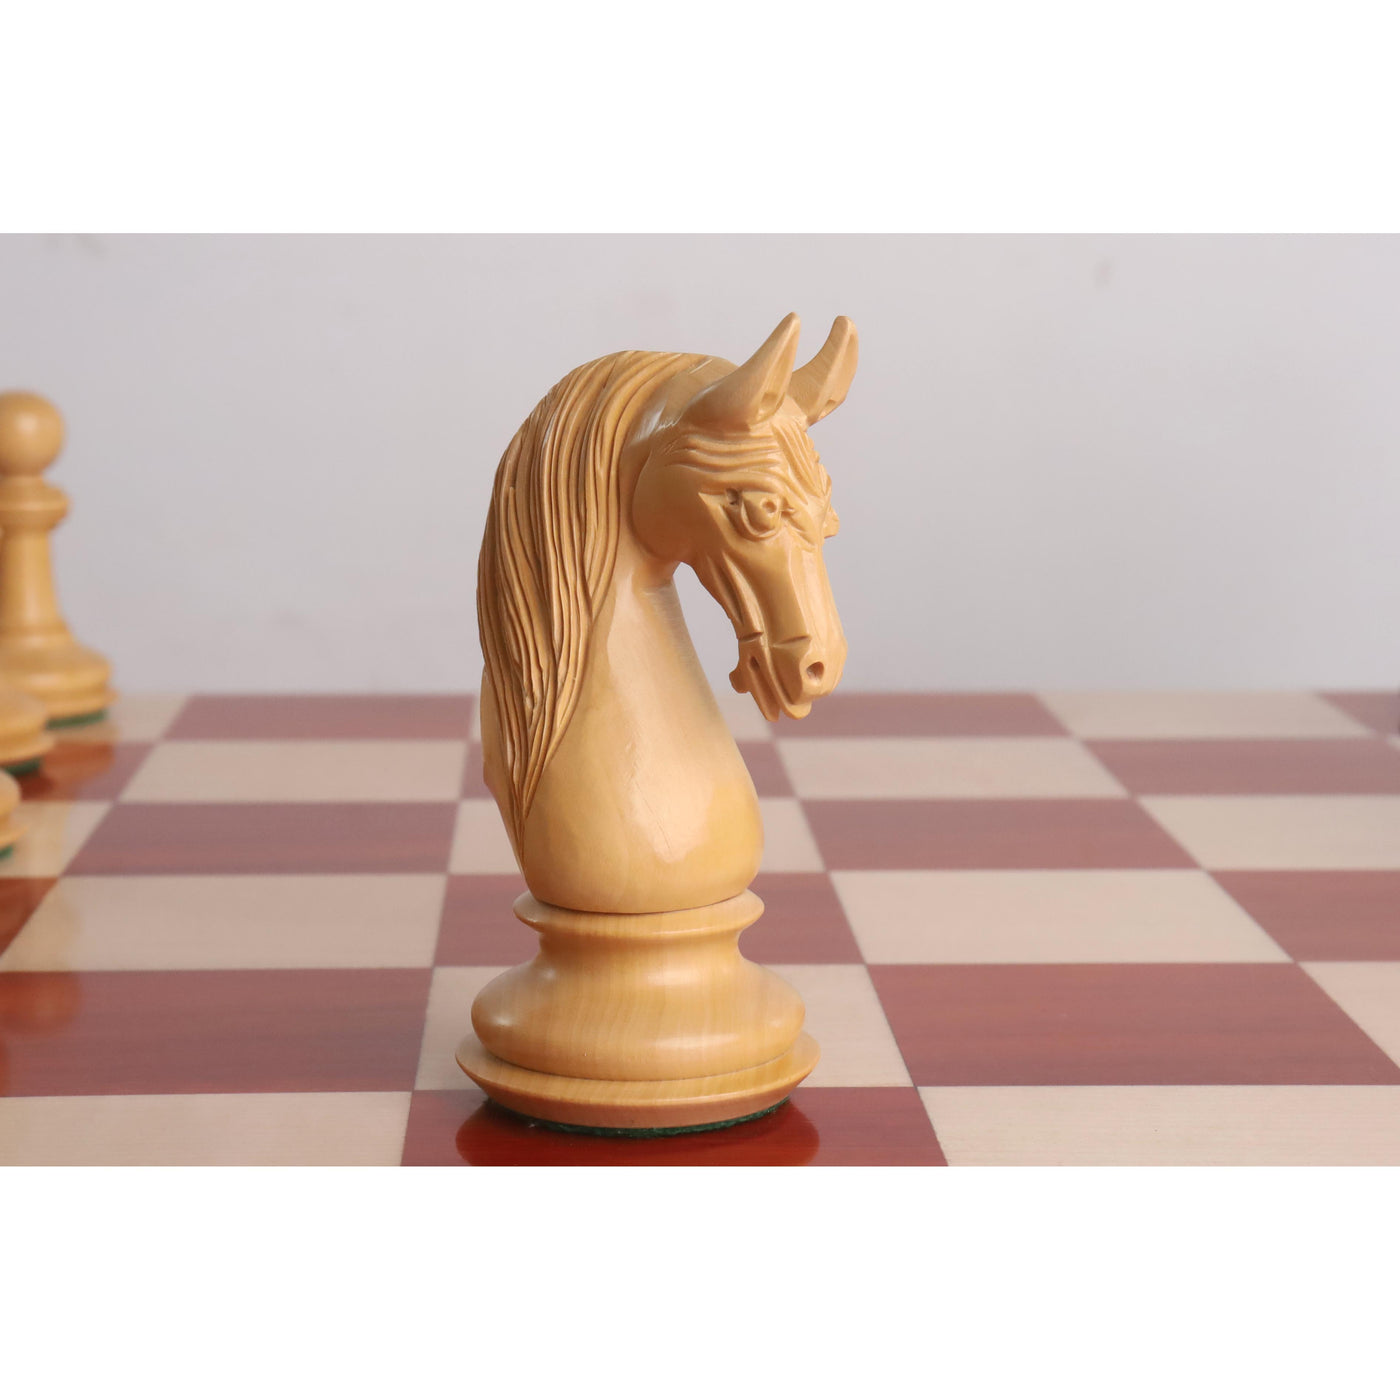 4.6" Bath Luxury Staunton Chess Set - Chess Pieces Only - Bud Rosewood - Triple Weight